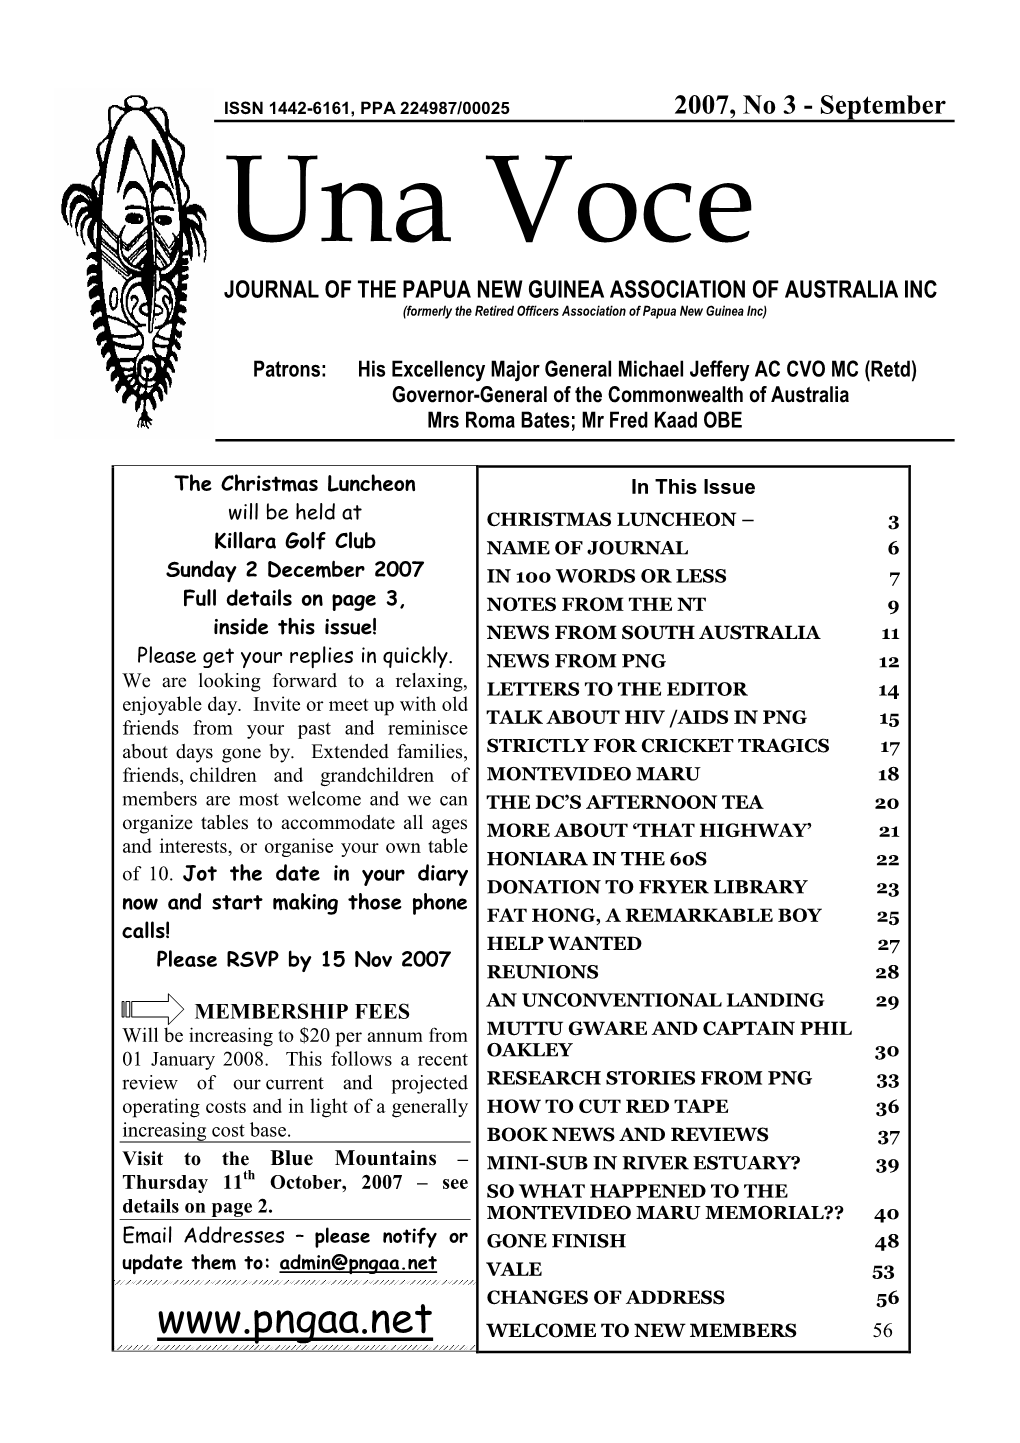 September Una Voce JOURNAL of the PAPUA NEW GUINEA ASSOCIATION of AUSTRALIA INC (Formerly the Retired Officers Association of Papua New Guinea Inc)